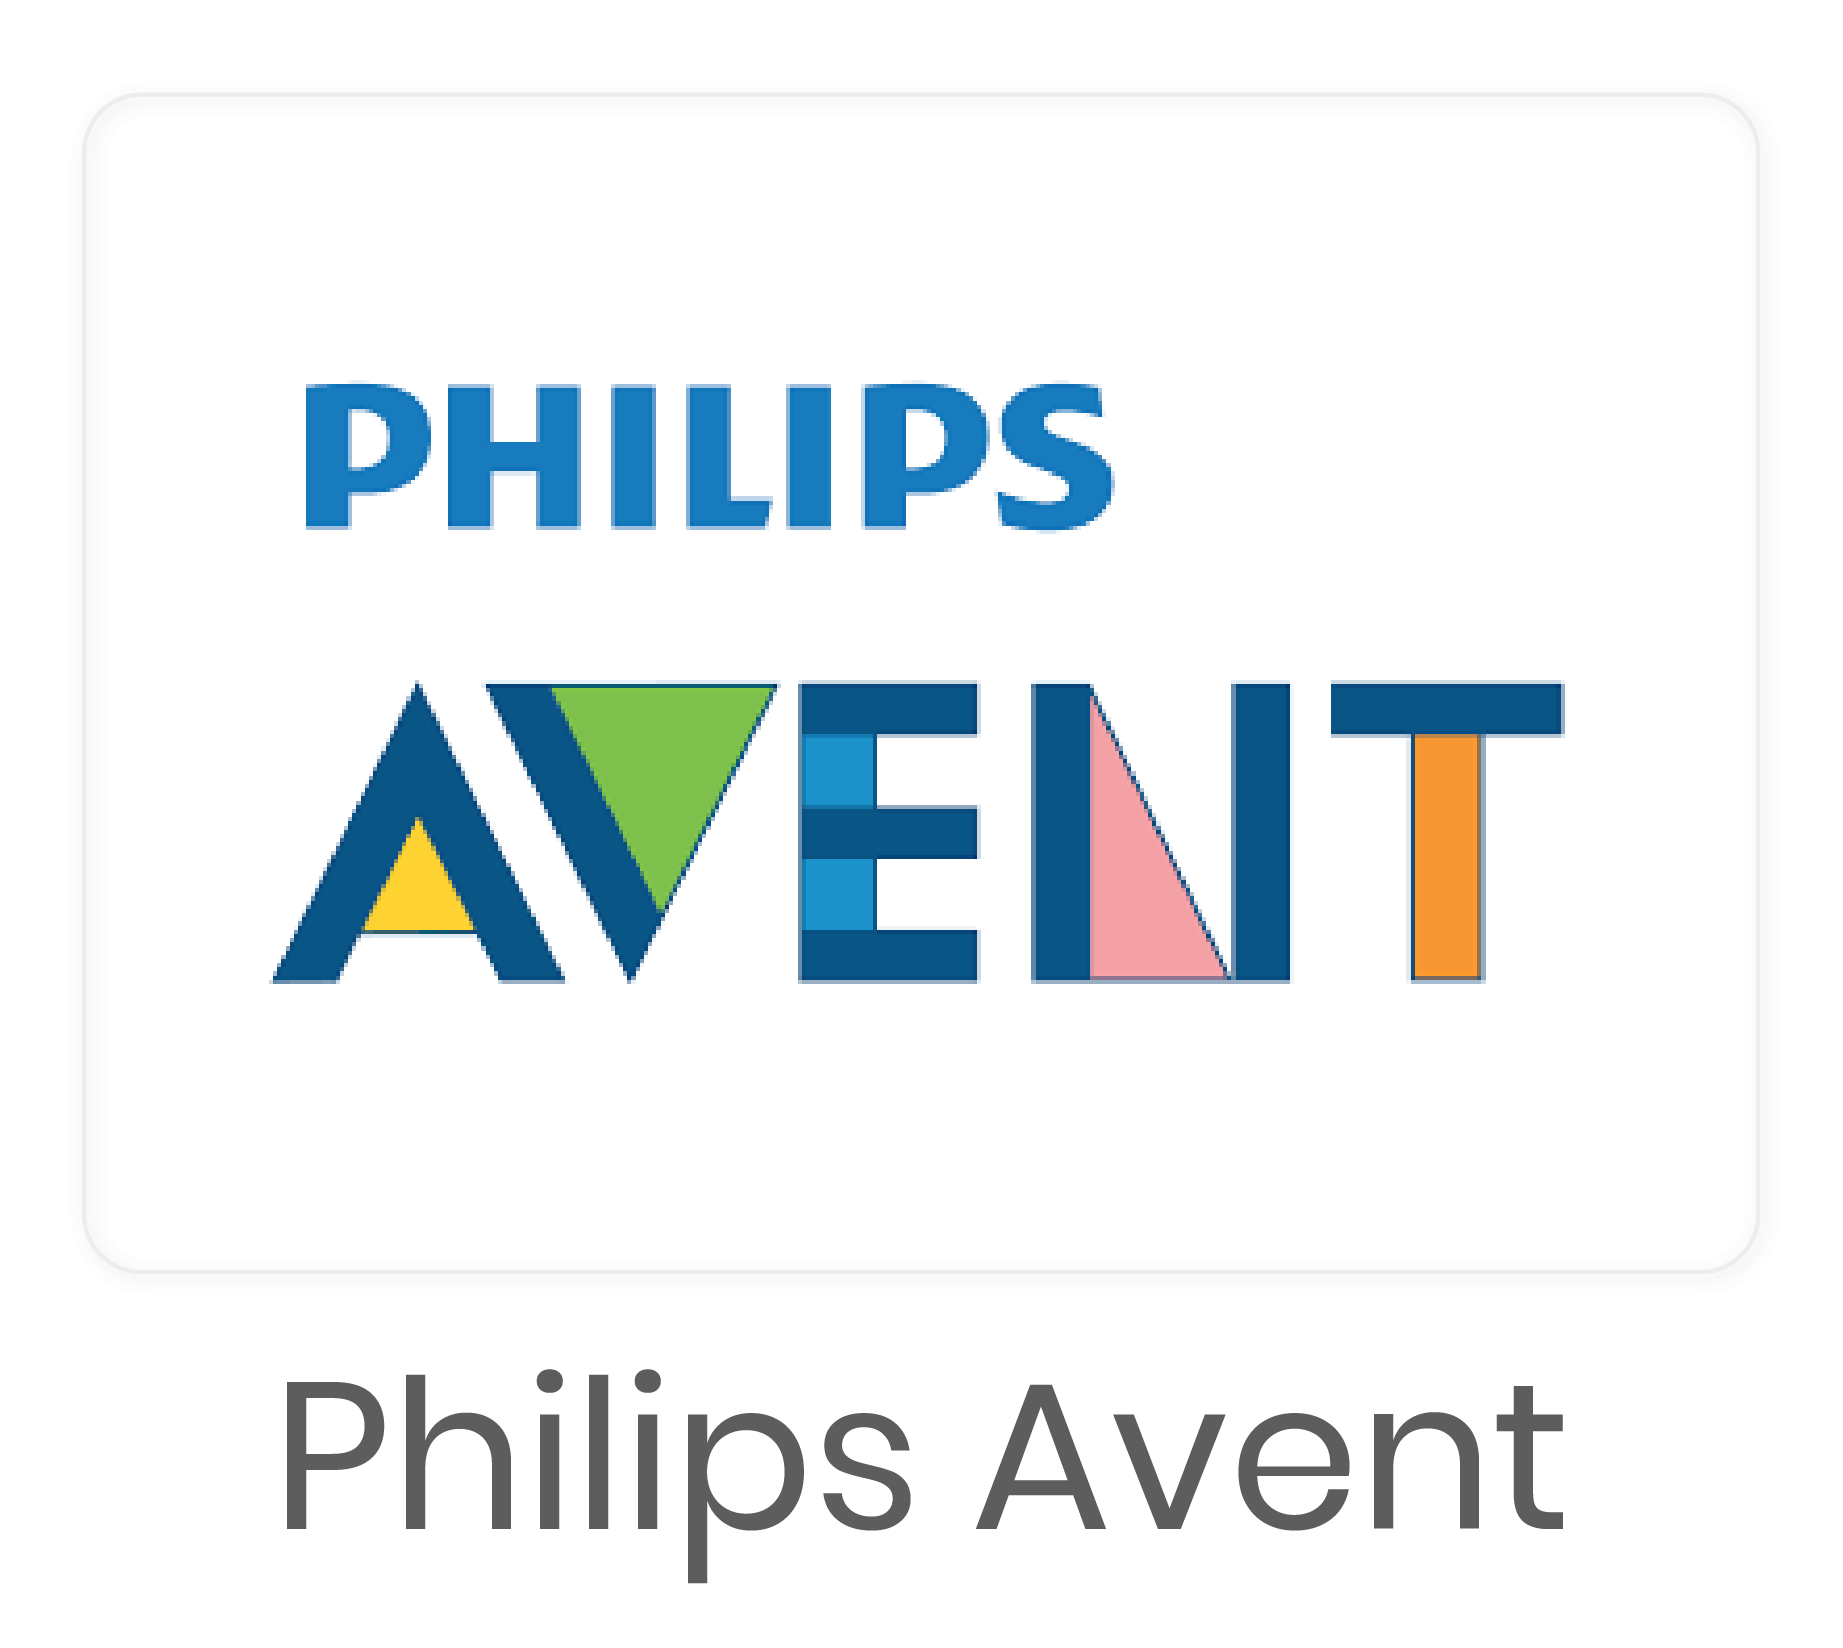 PhilipsAvent.png